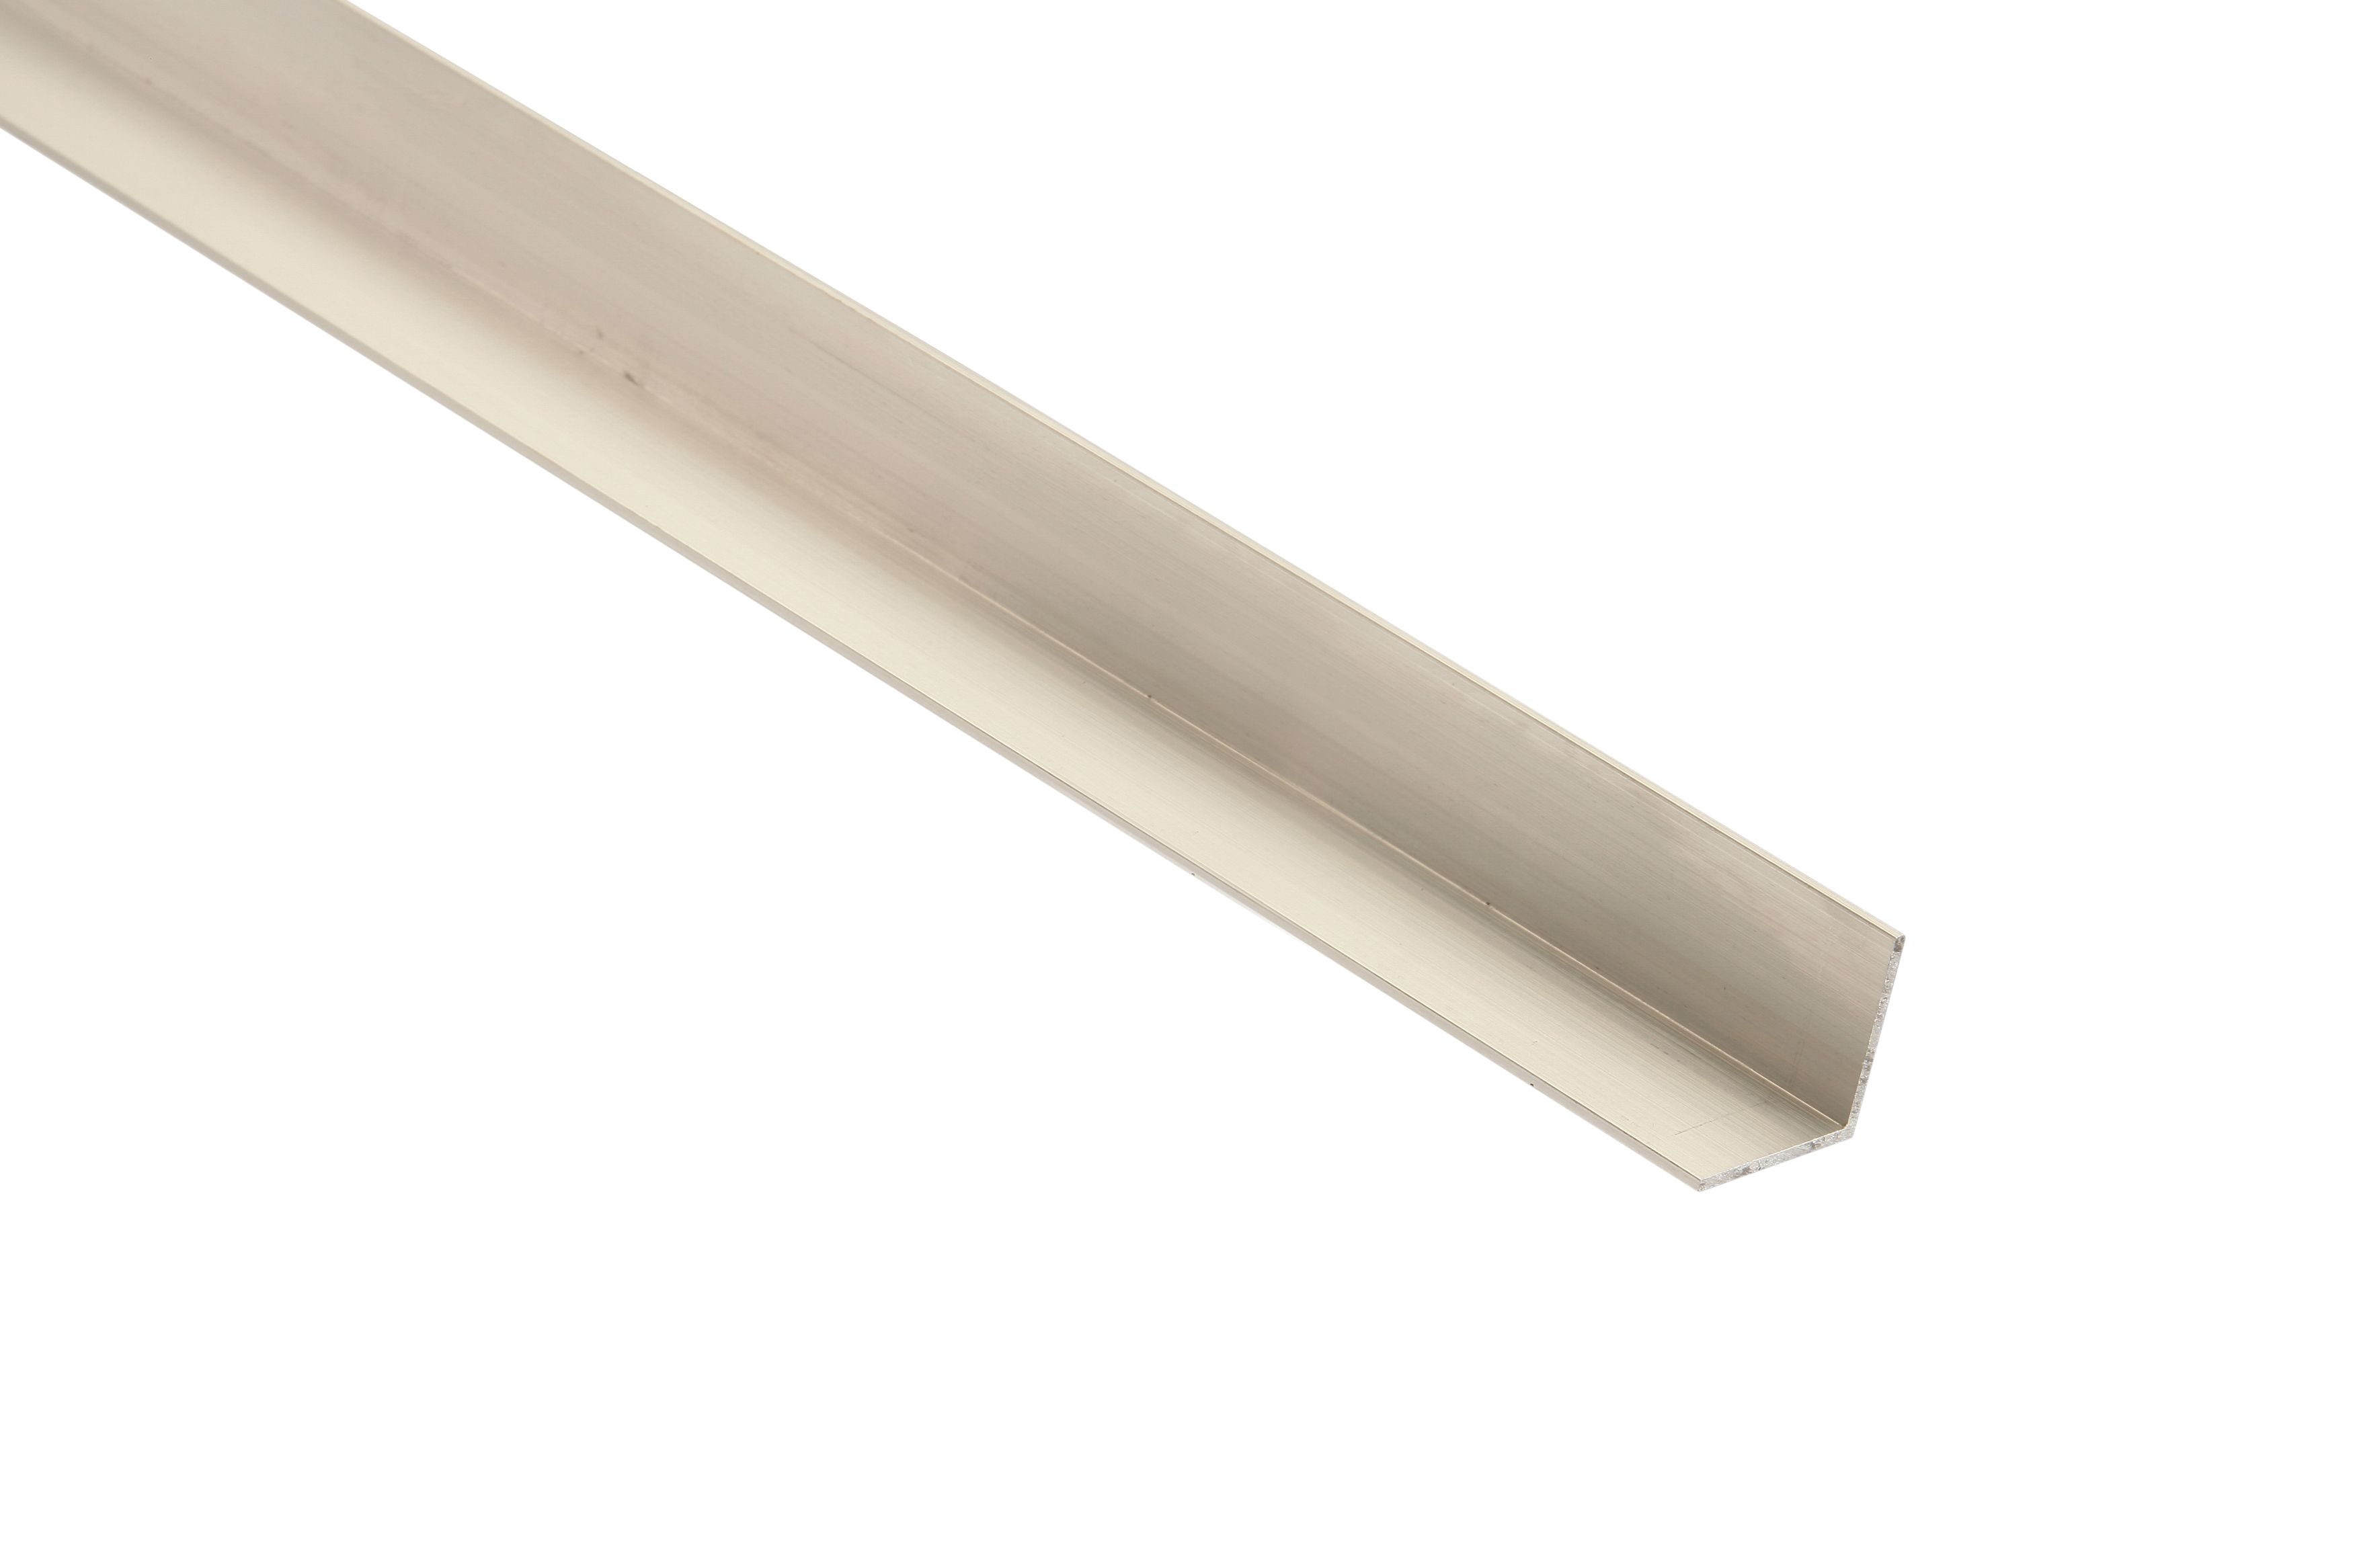 Image of Wickes Aluminium Angle Moulding - 12 x 12 x 2400mm